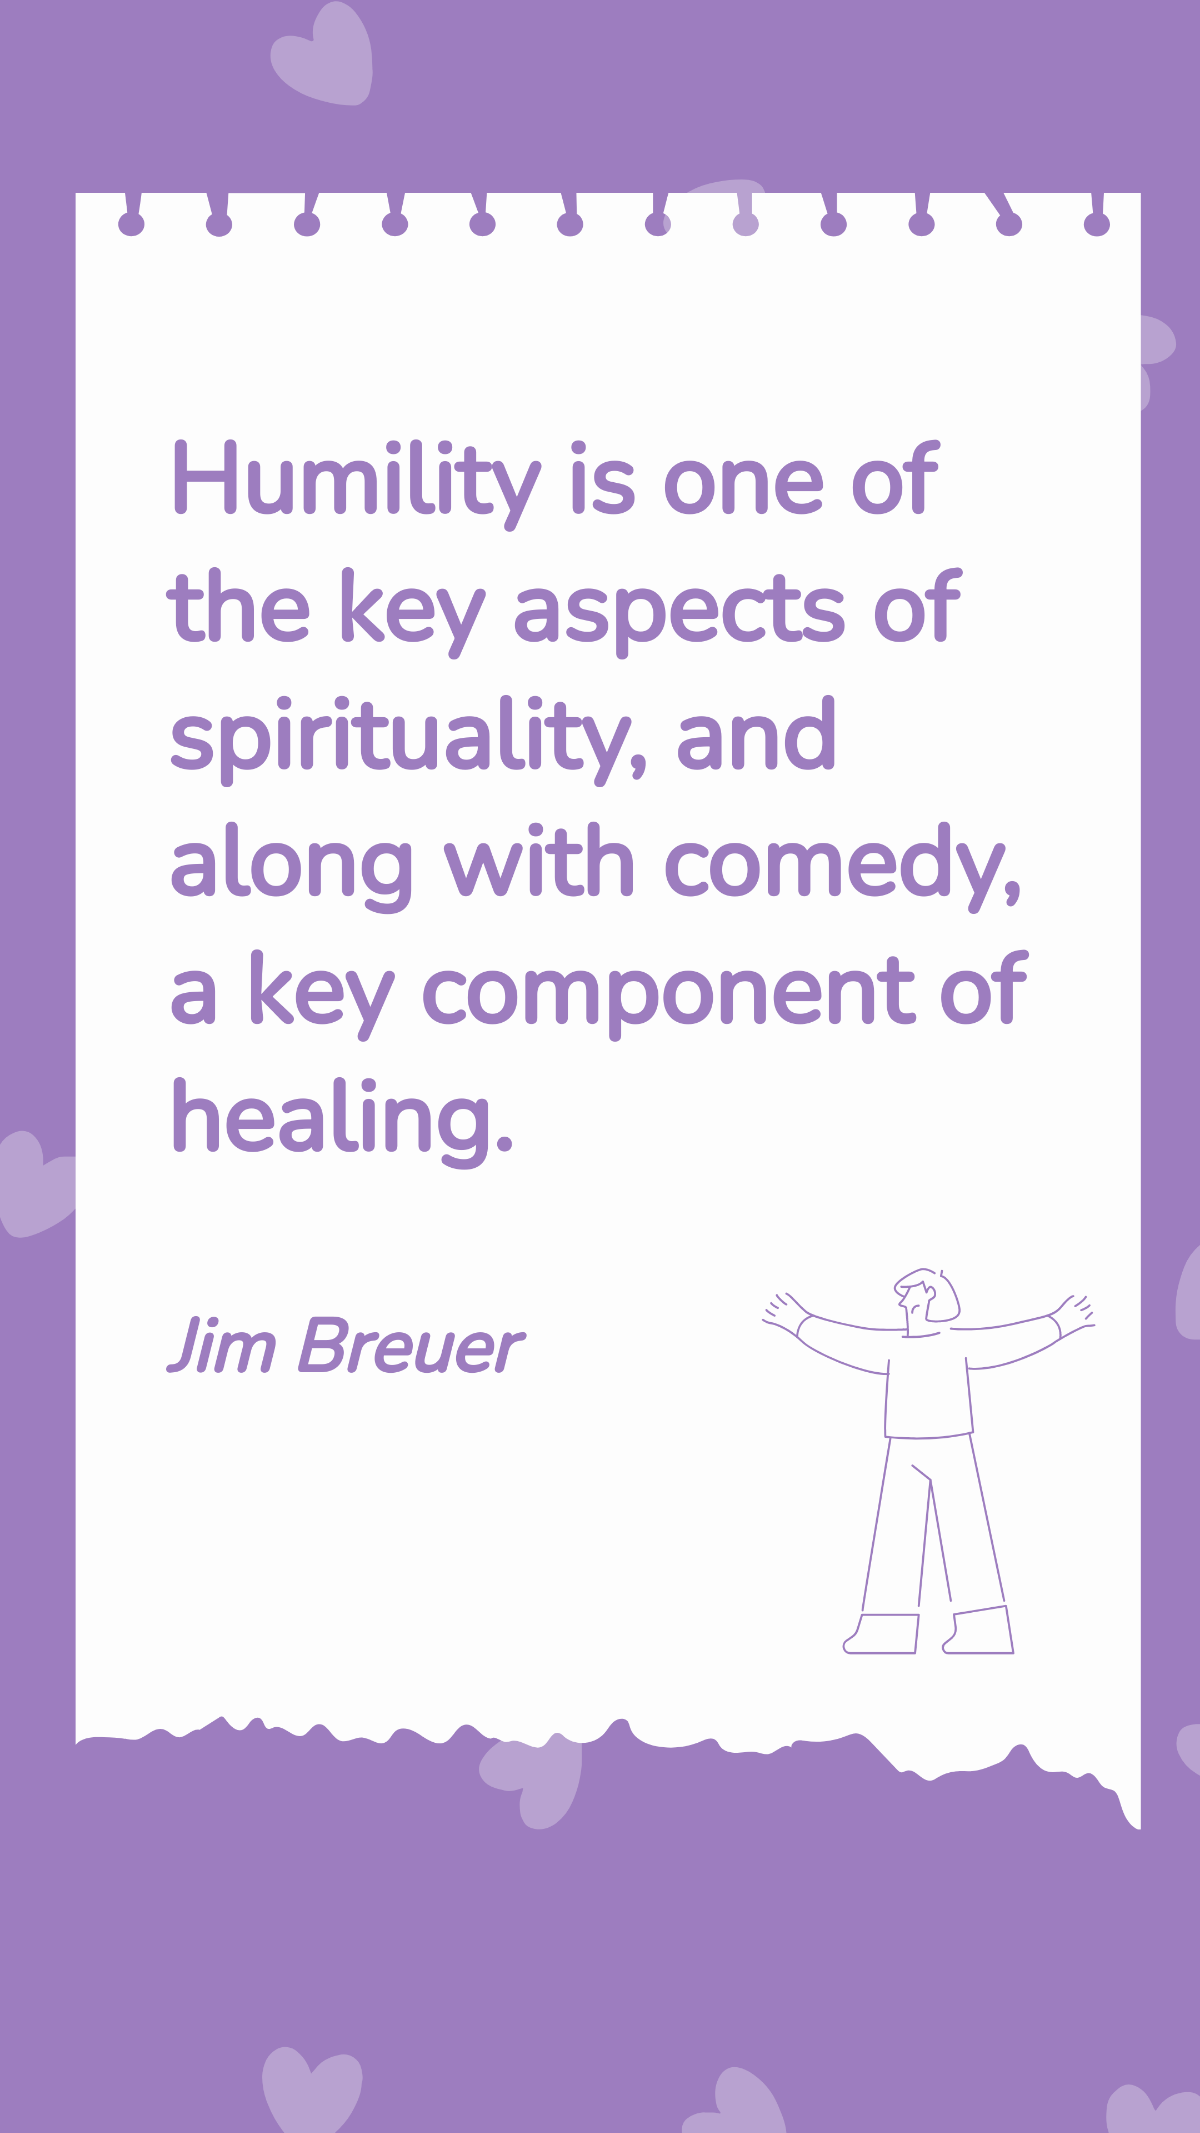 Jim Breuer - Humility is one of the key aspects of spirituality, and along with comedy, a key component of healing. Template